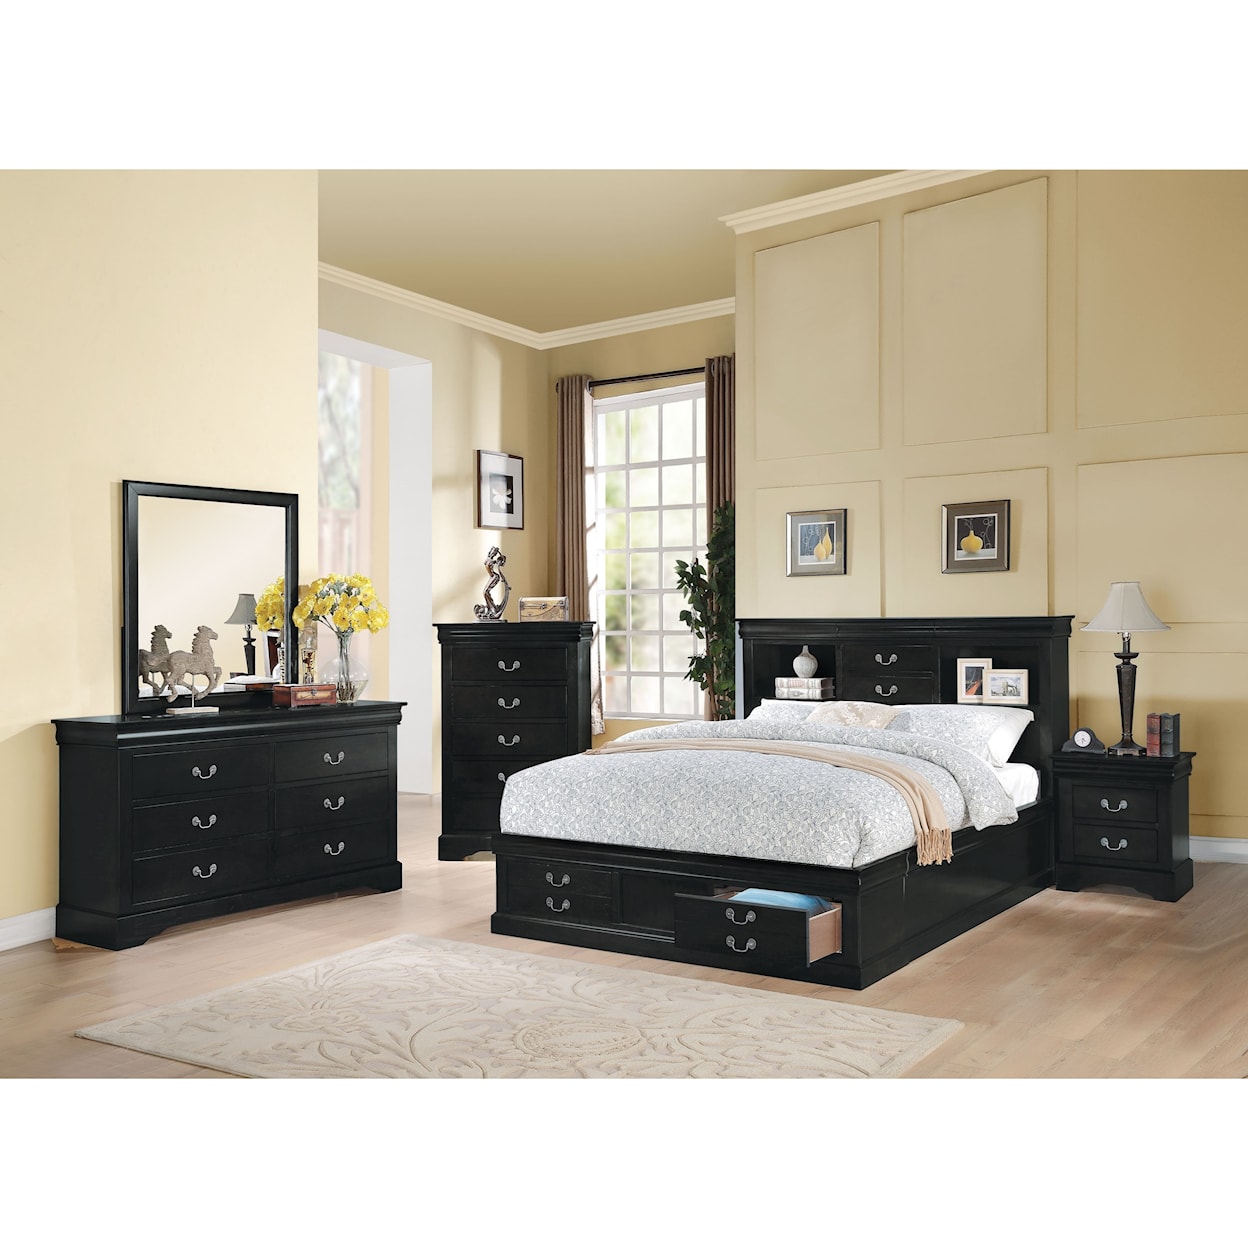 Acme Furniture 23730Q Louis Philippe Queen Bed Black  Black bedding,  Headboards for beds, Eastern king bed